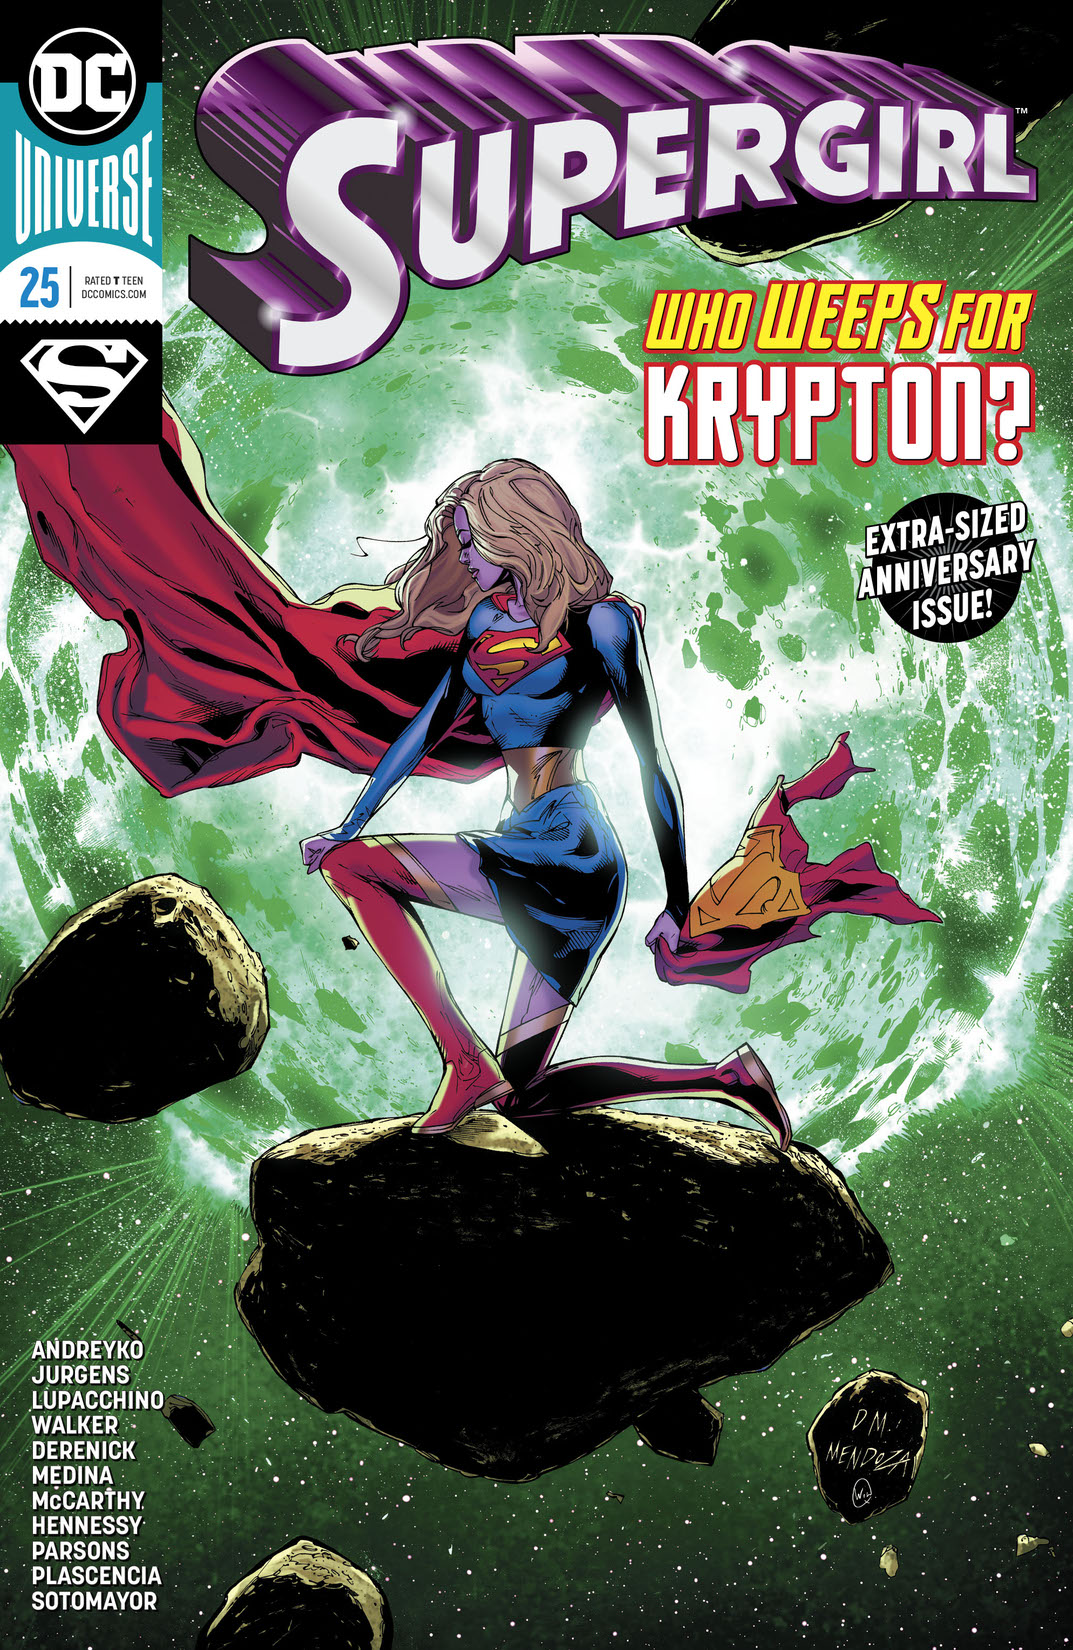 Supergirl (2016-) #25 preview images